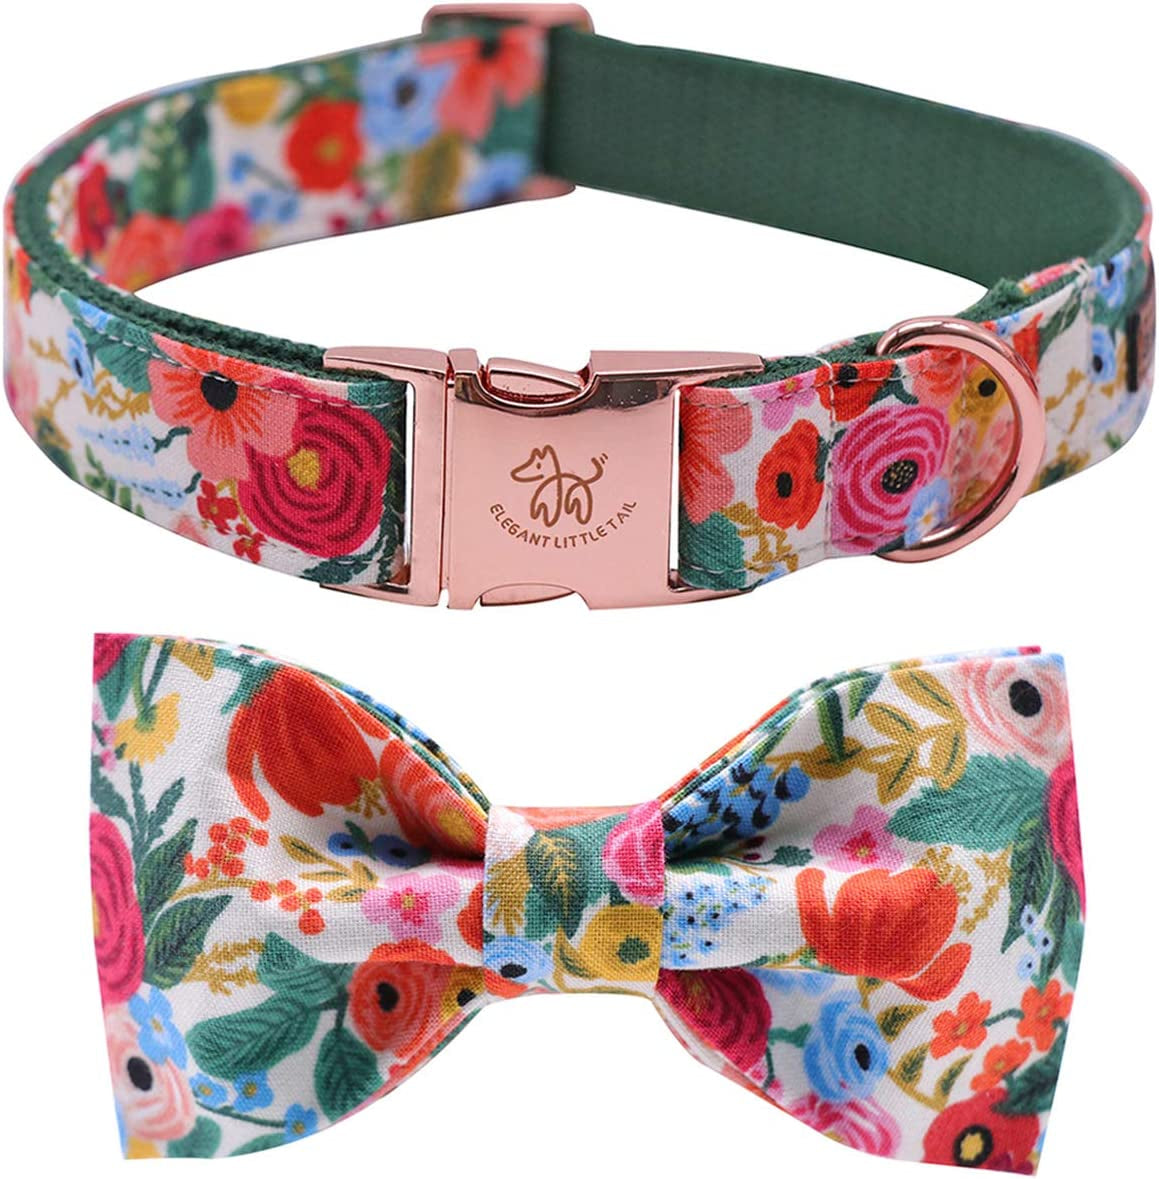 "Bowtie Elegance: Luxury Cotton & Webbing Dog Collar - Adjustable for Dogs and Cats of All Sizes"